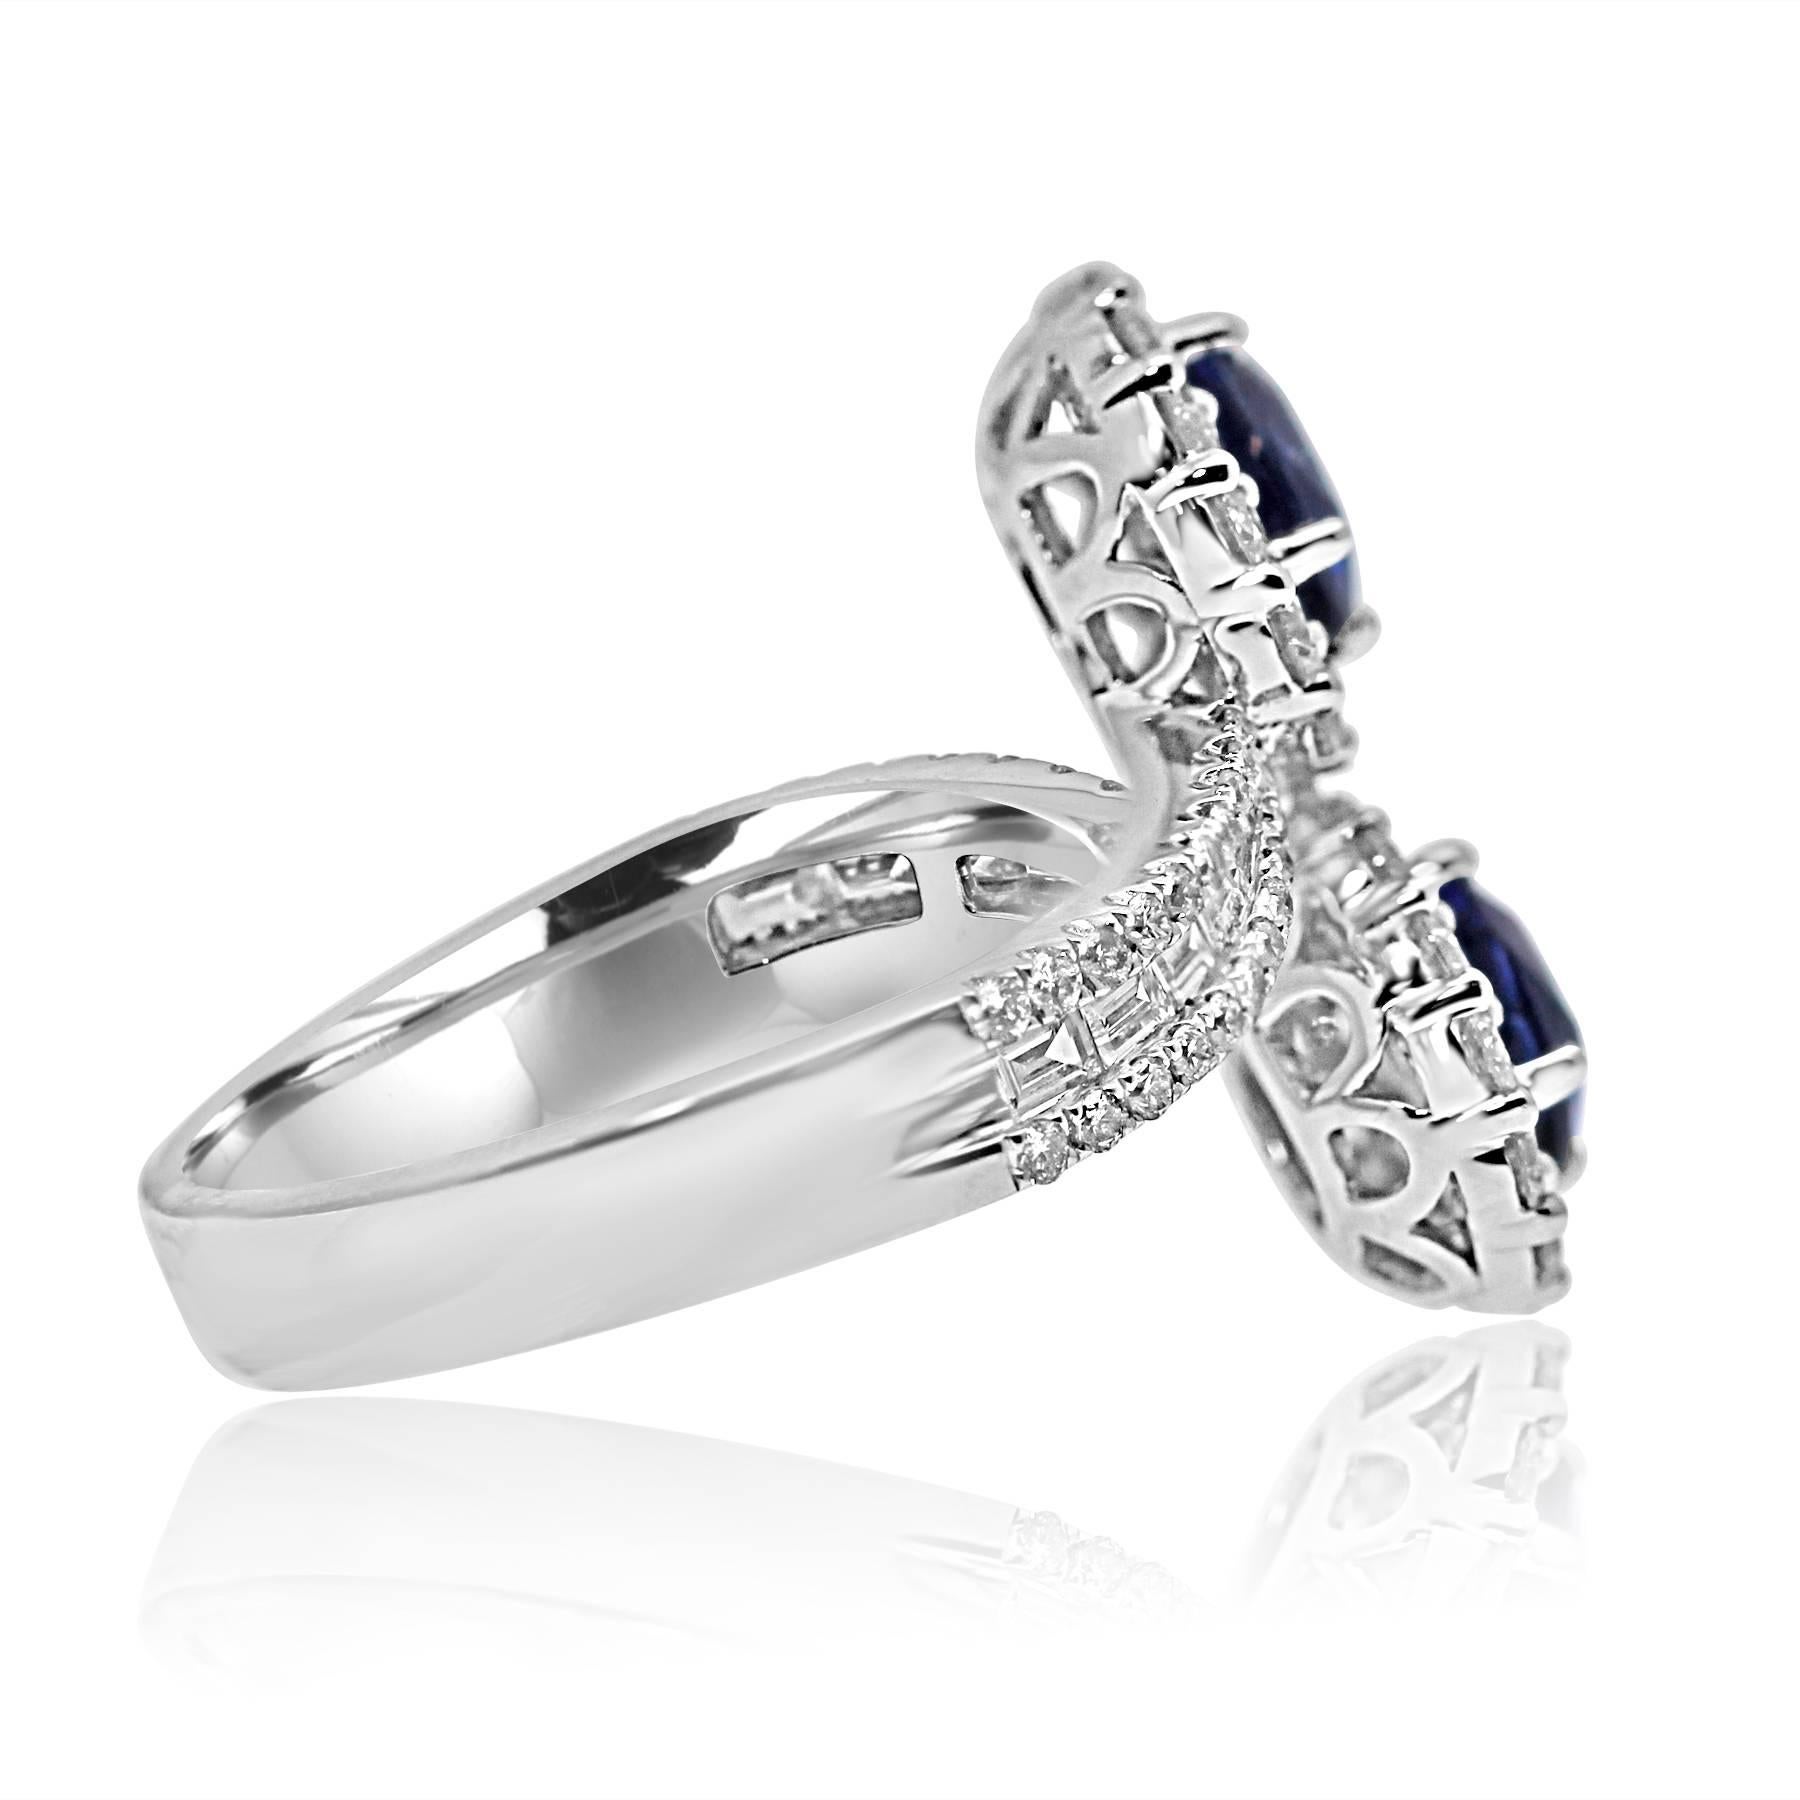 Contemporary Platinum Toi-et-Moi Ring Set with Diamonds and Blue Sapphires Gemstones For Sale